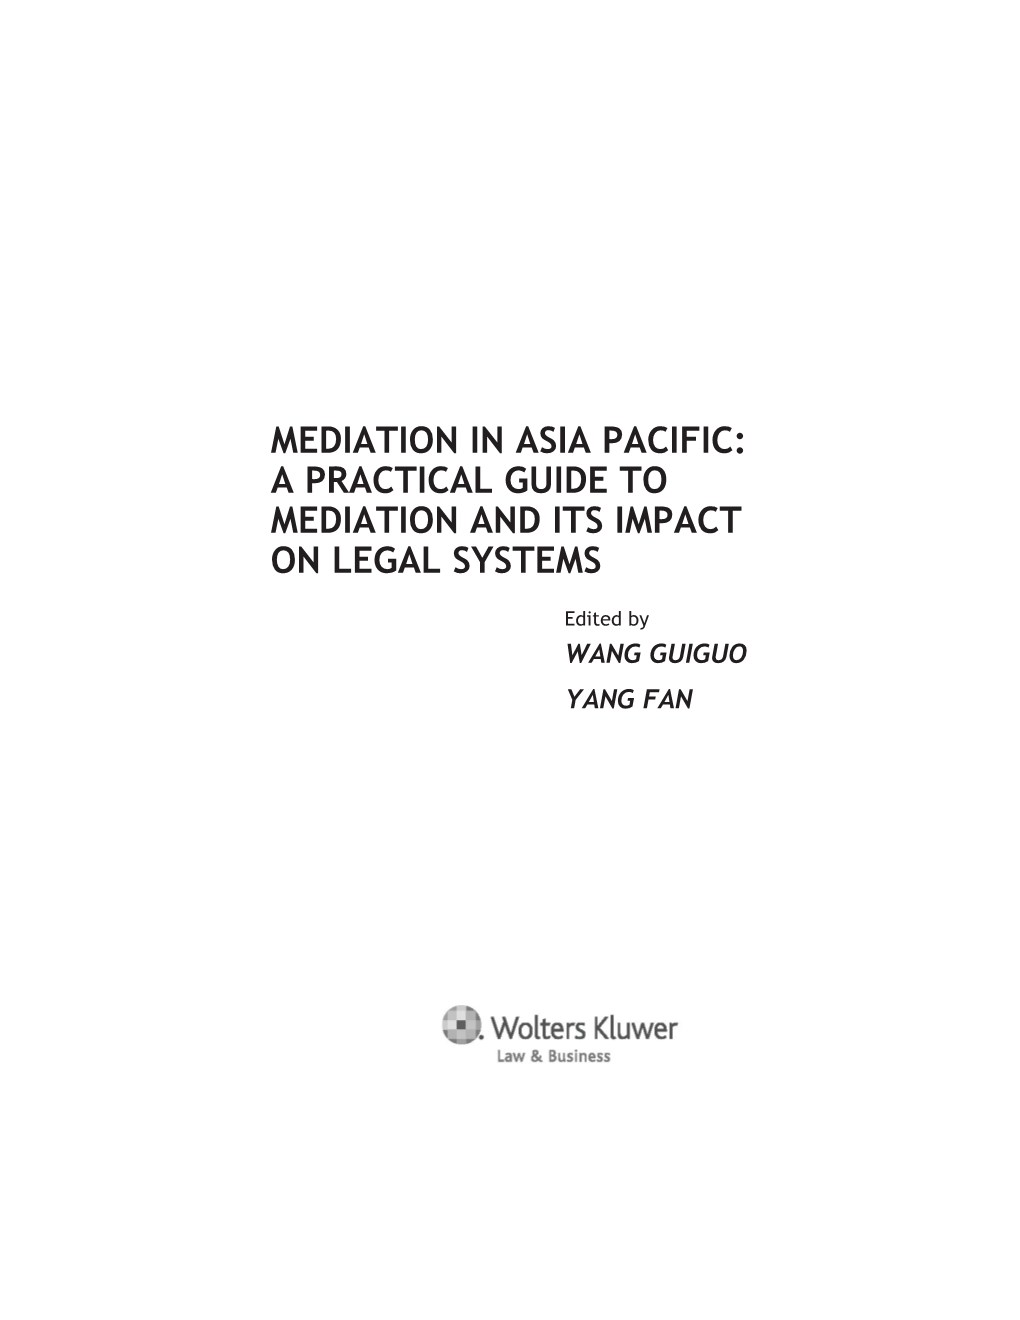 A Practical Guide to Mediation and Its Impact on Legal Systems